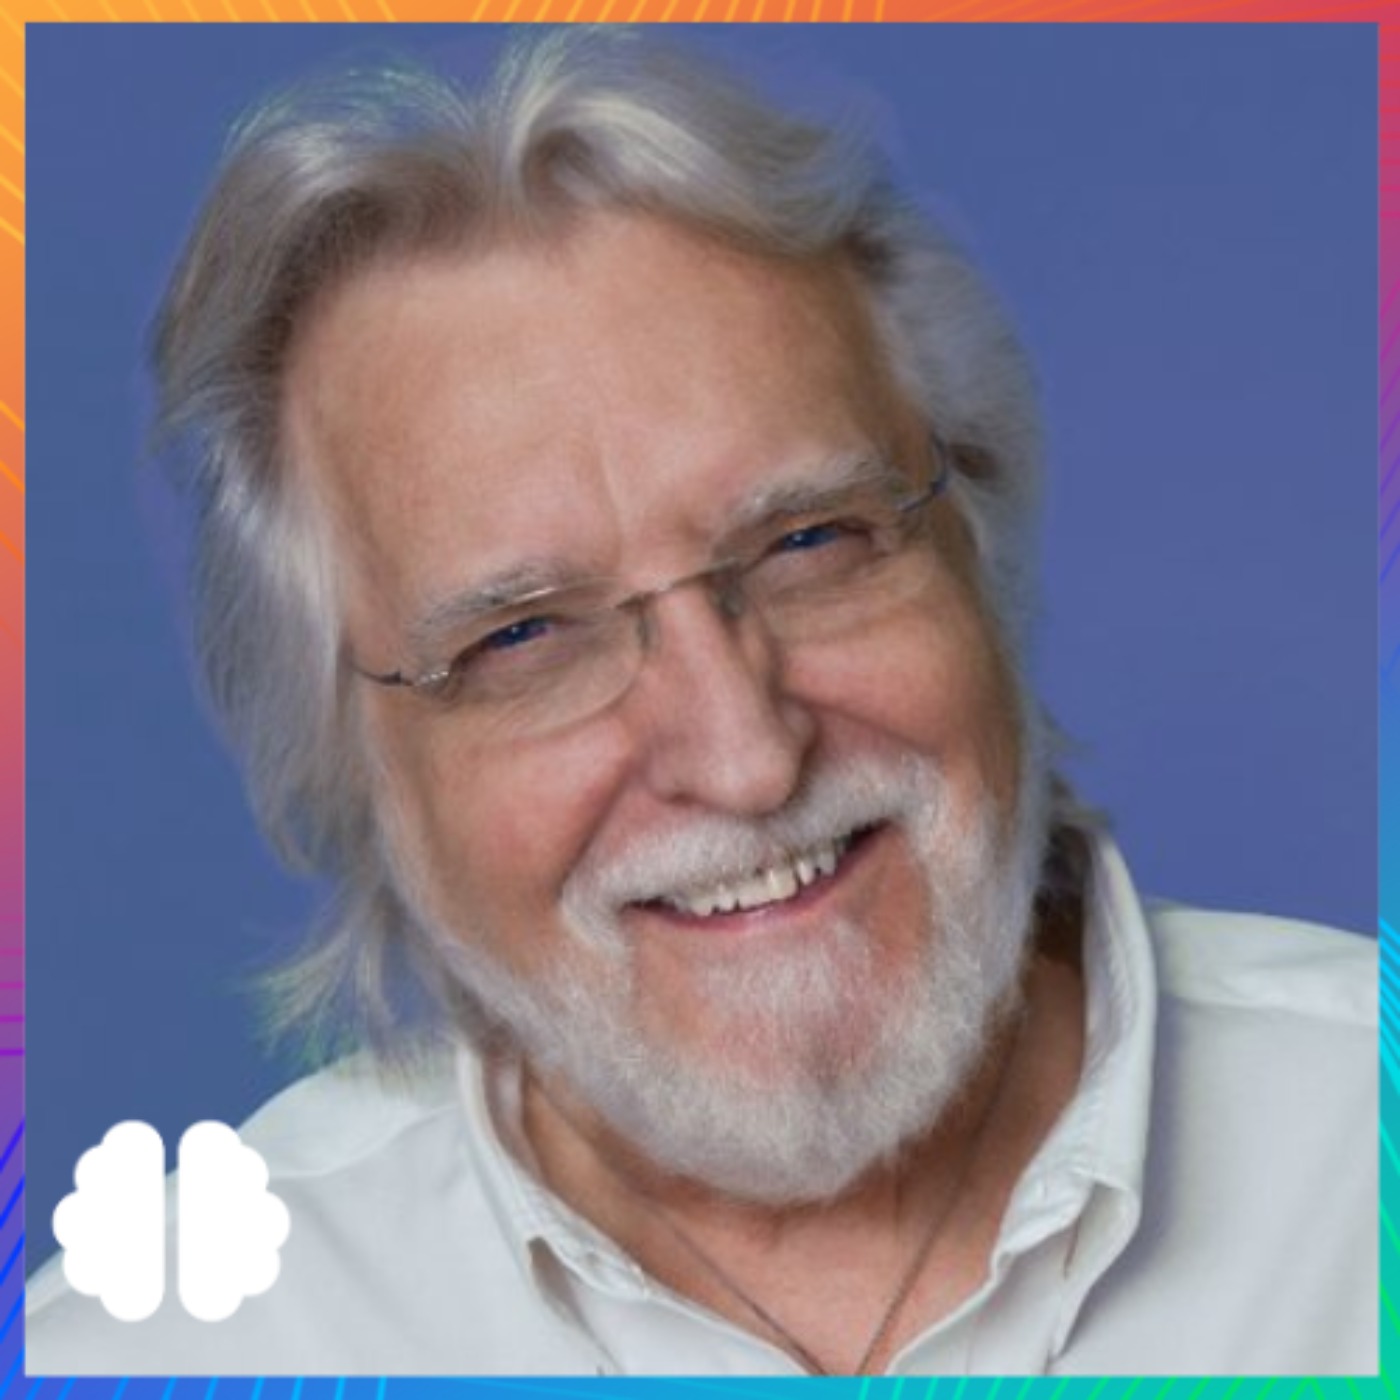 cover art for IE358: Neale Donald Walsch: BREAKING THE HEAVENS: DIVINITY or BLASPHEMY?! Neale Donald Walsch UNVEILS How to TALK to GOD DIRECT!